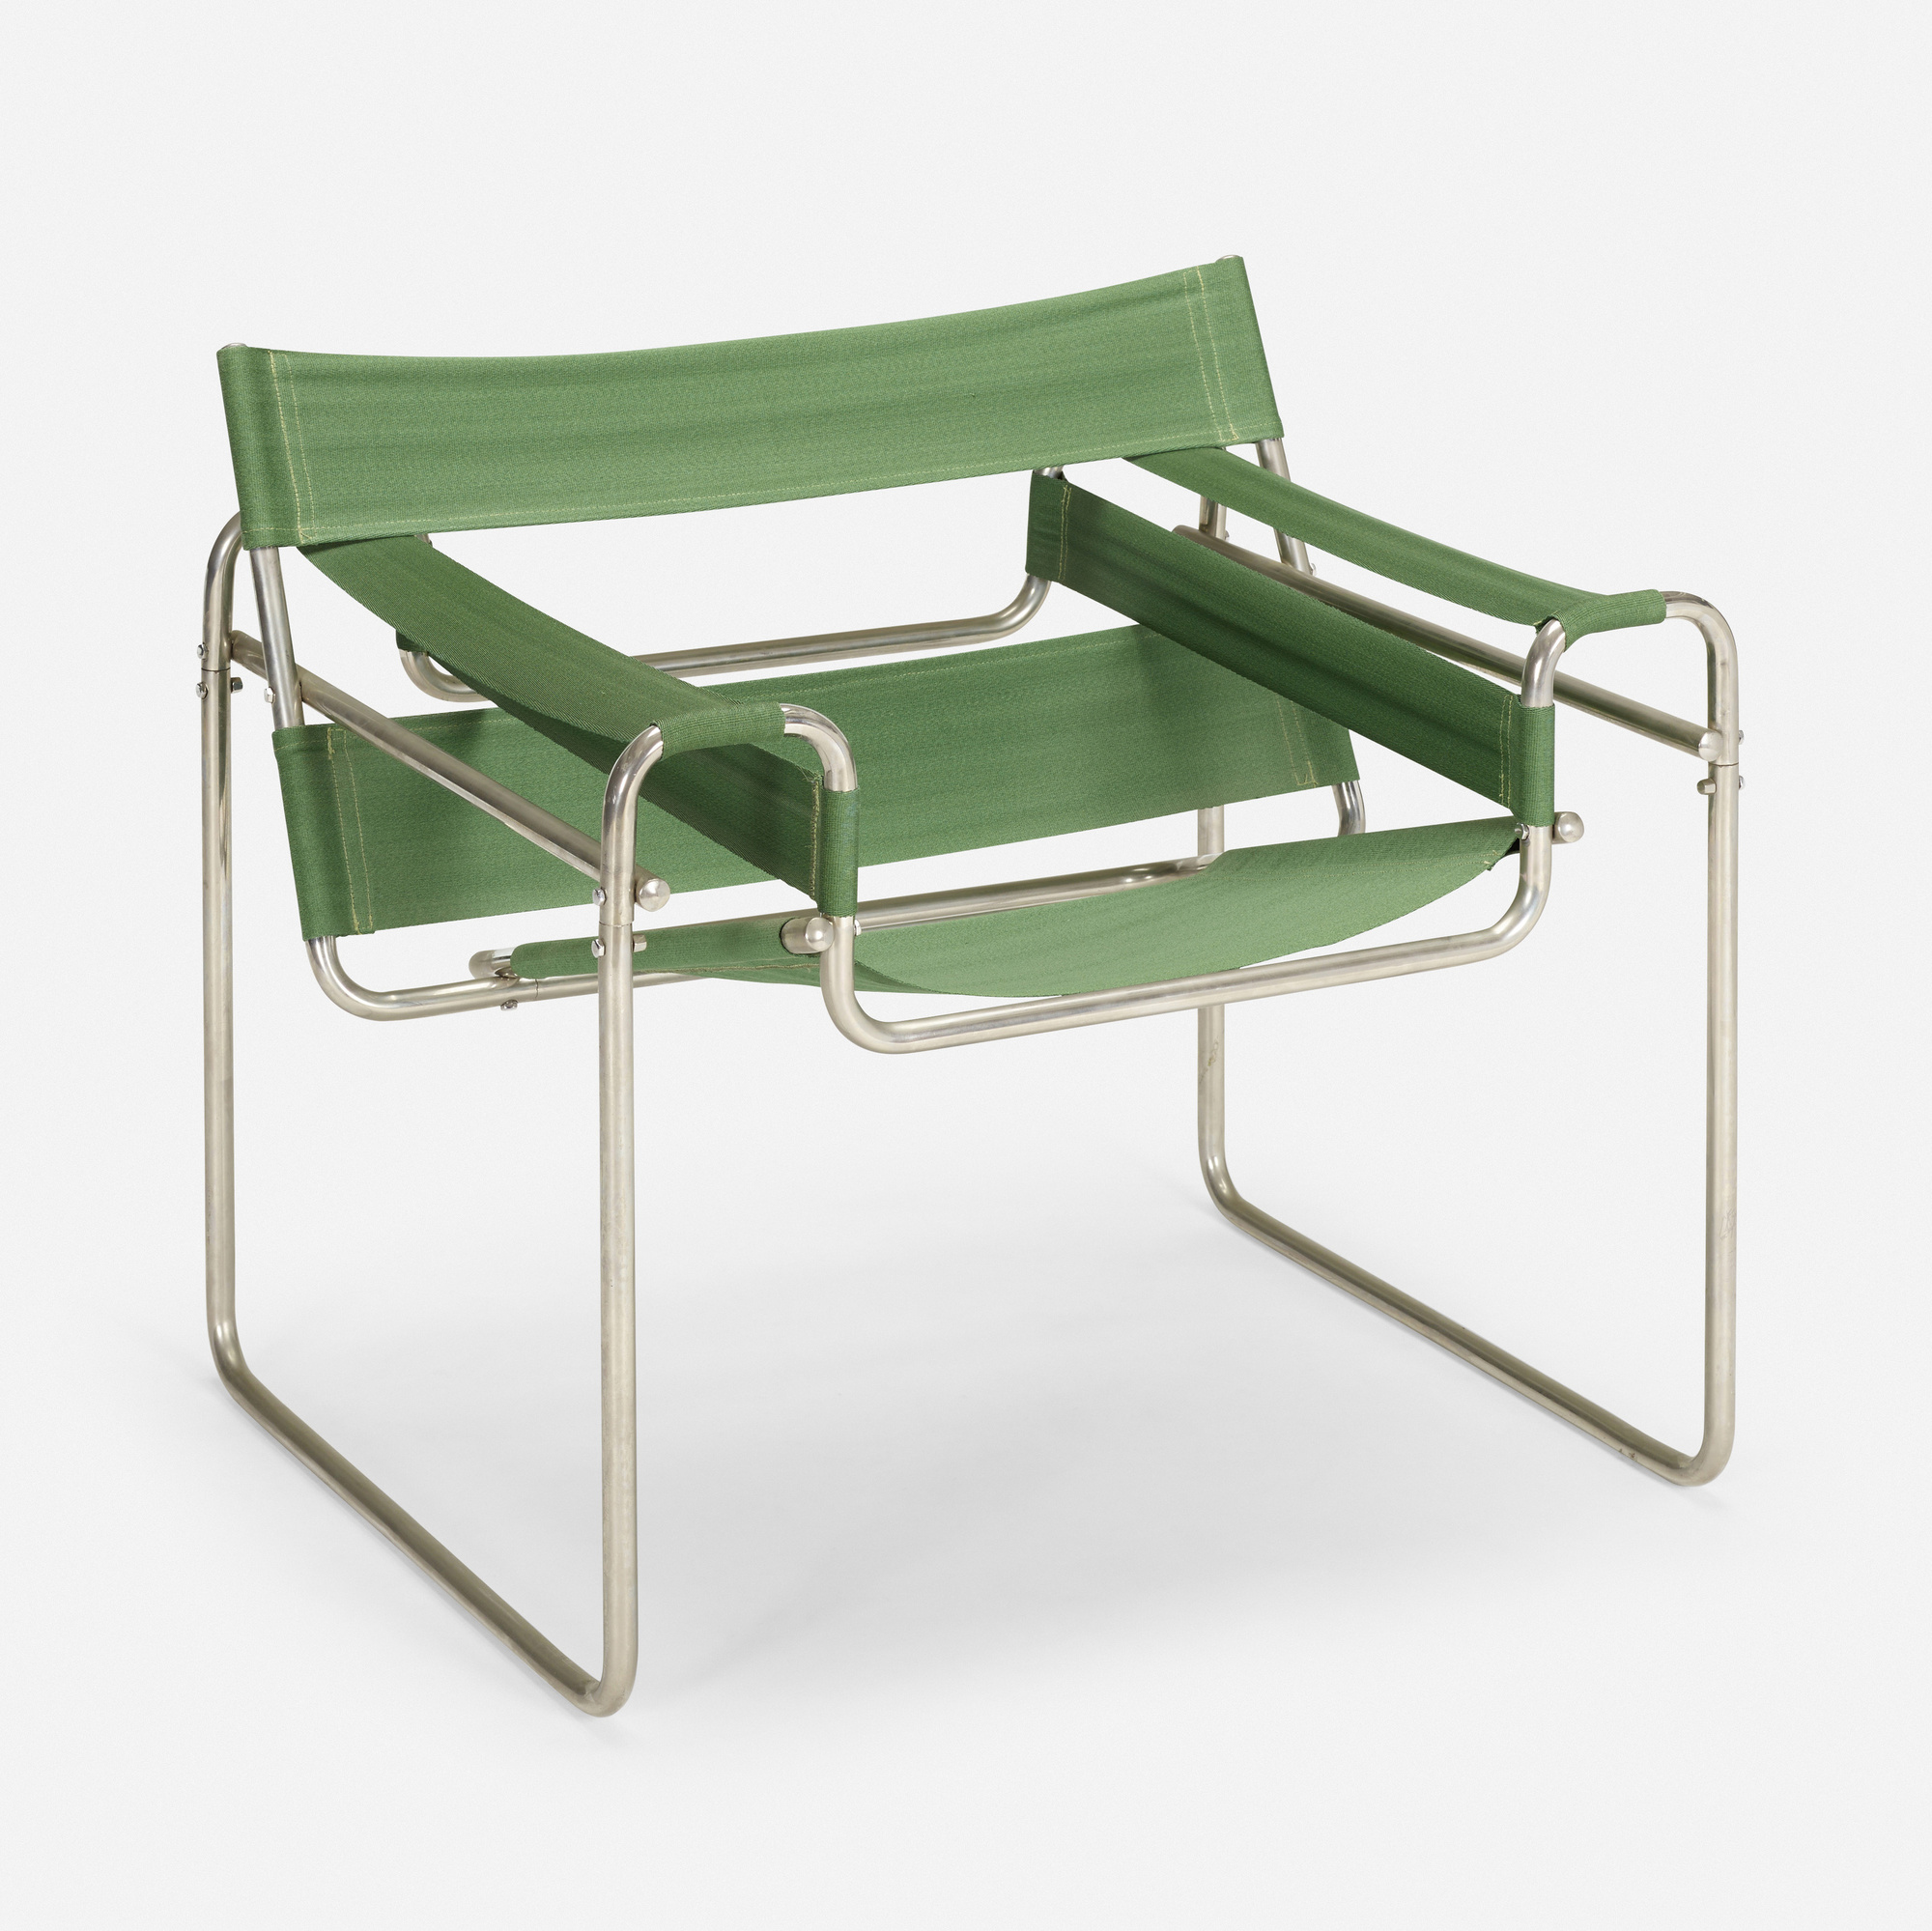 126: MARCEL BREUER, Early and Rare Wassily armchair, model B3 